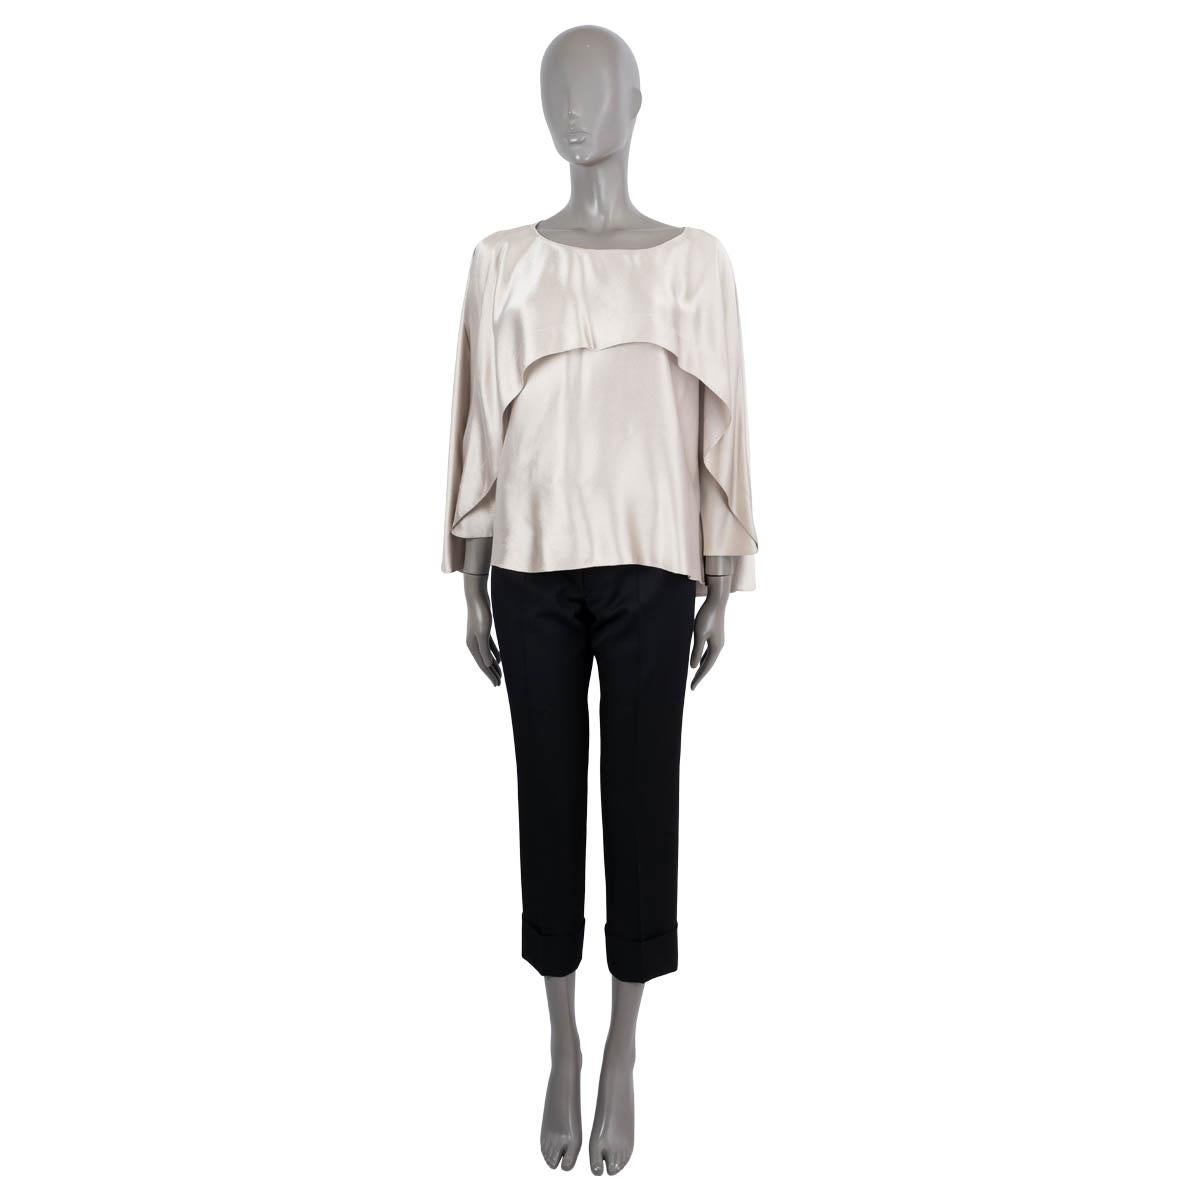 100% authentic Lanvin oversized satin blouse in champagne viscose (52%) and acetate (48%). Features an overlay, 3/4 cape sleeves and a round neck. Unlined. Has been worn and is in excellent condition.

2014 Fall/Winter

Measurements
Tag